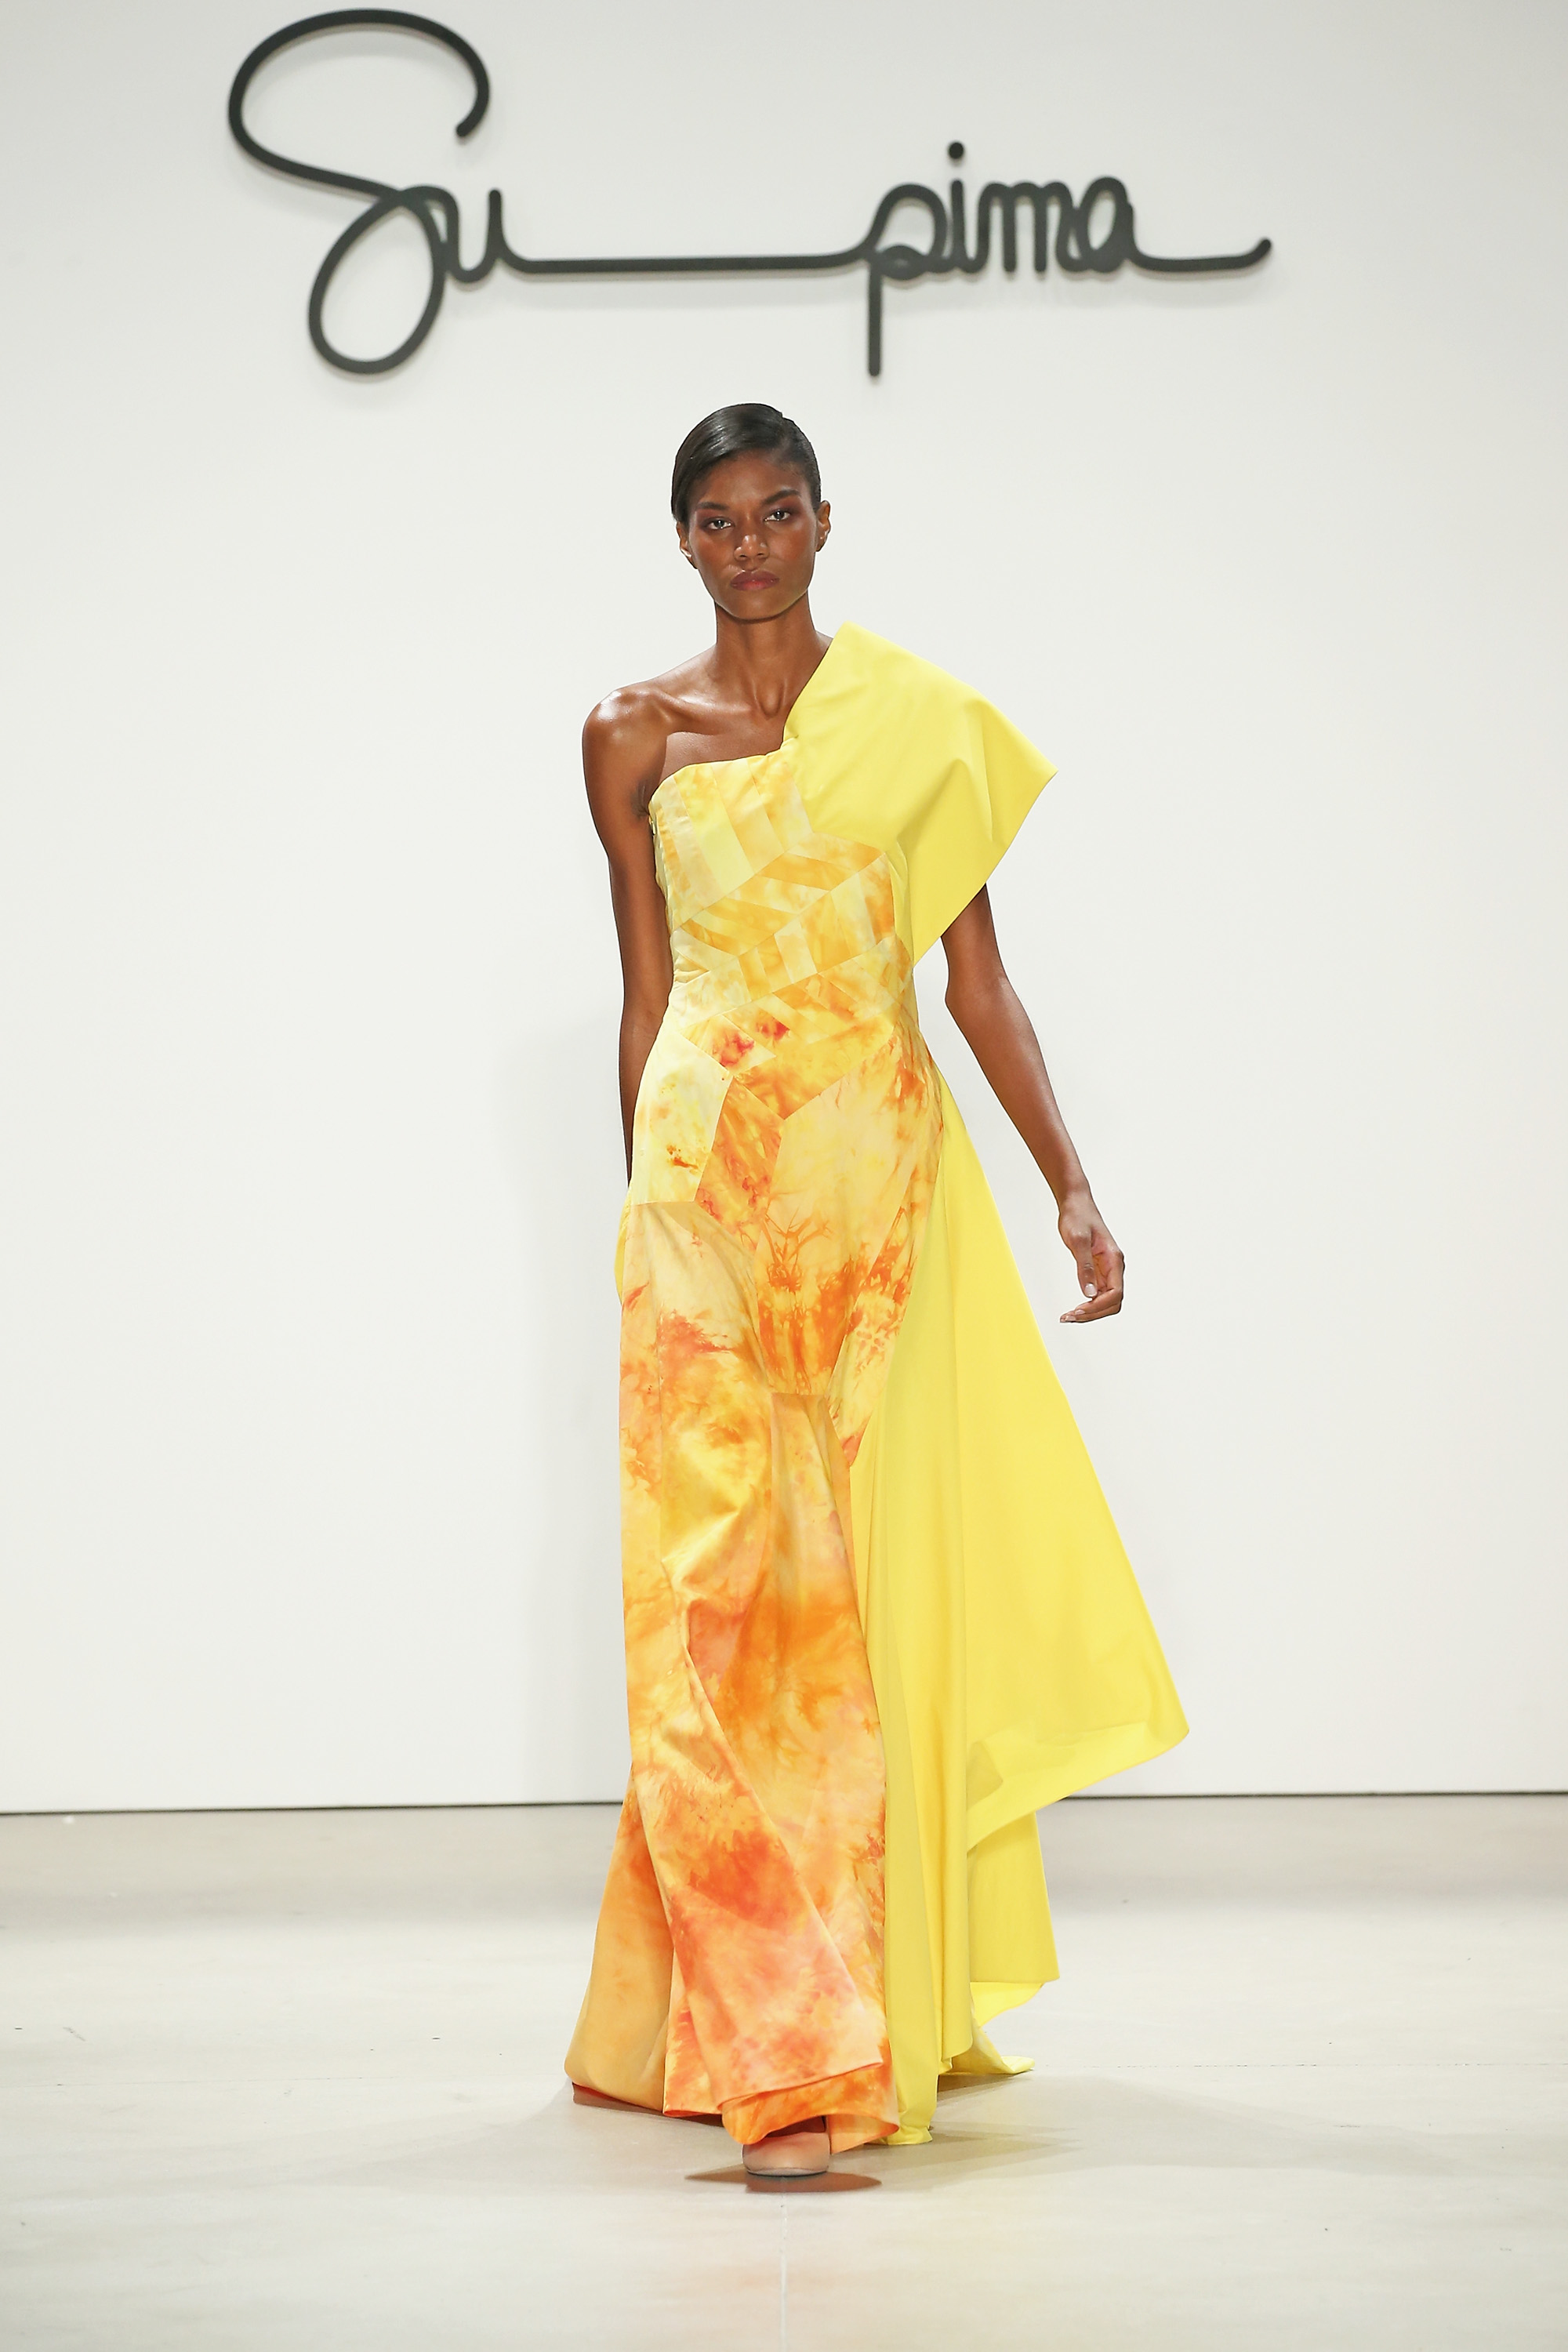 Shirting dress, ice dyed in fiery oranges and yellow with asymmetrical hemline, Courtesy of Supima